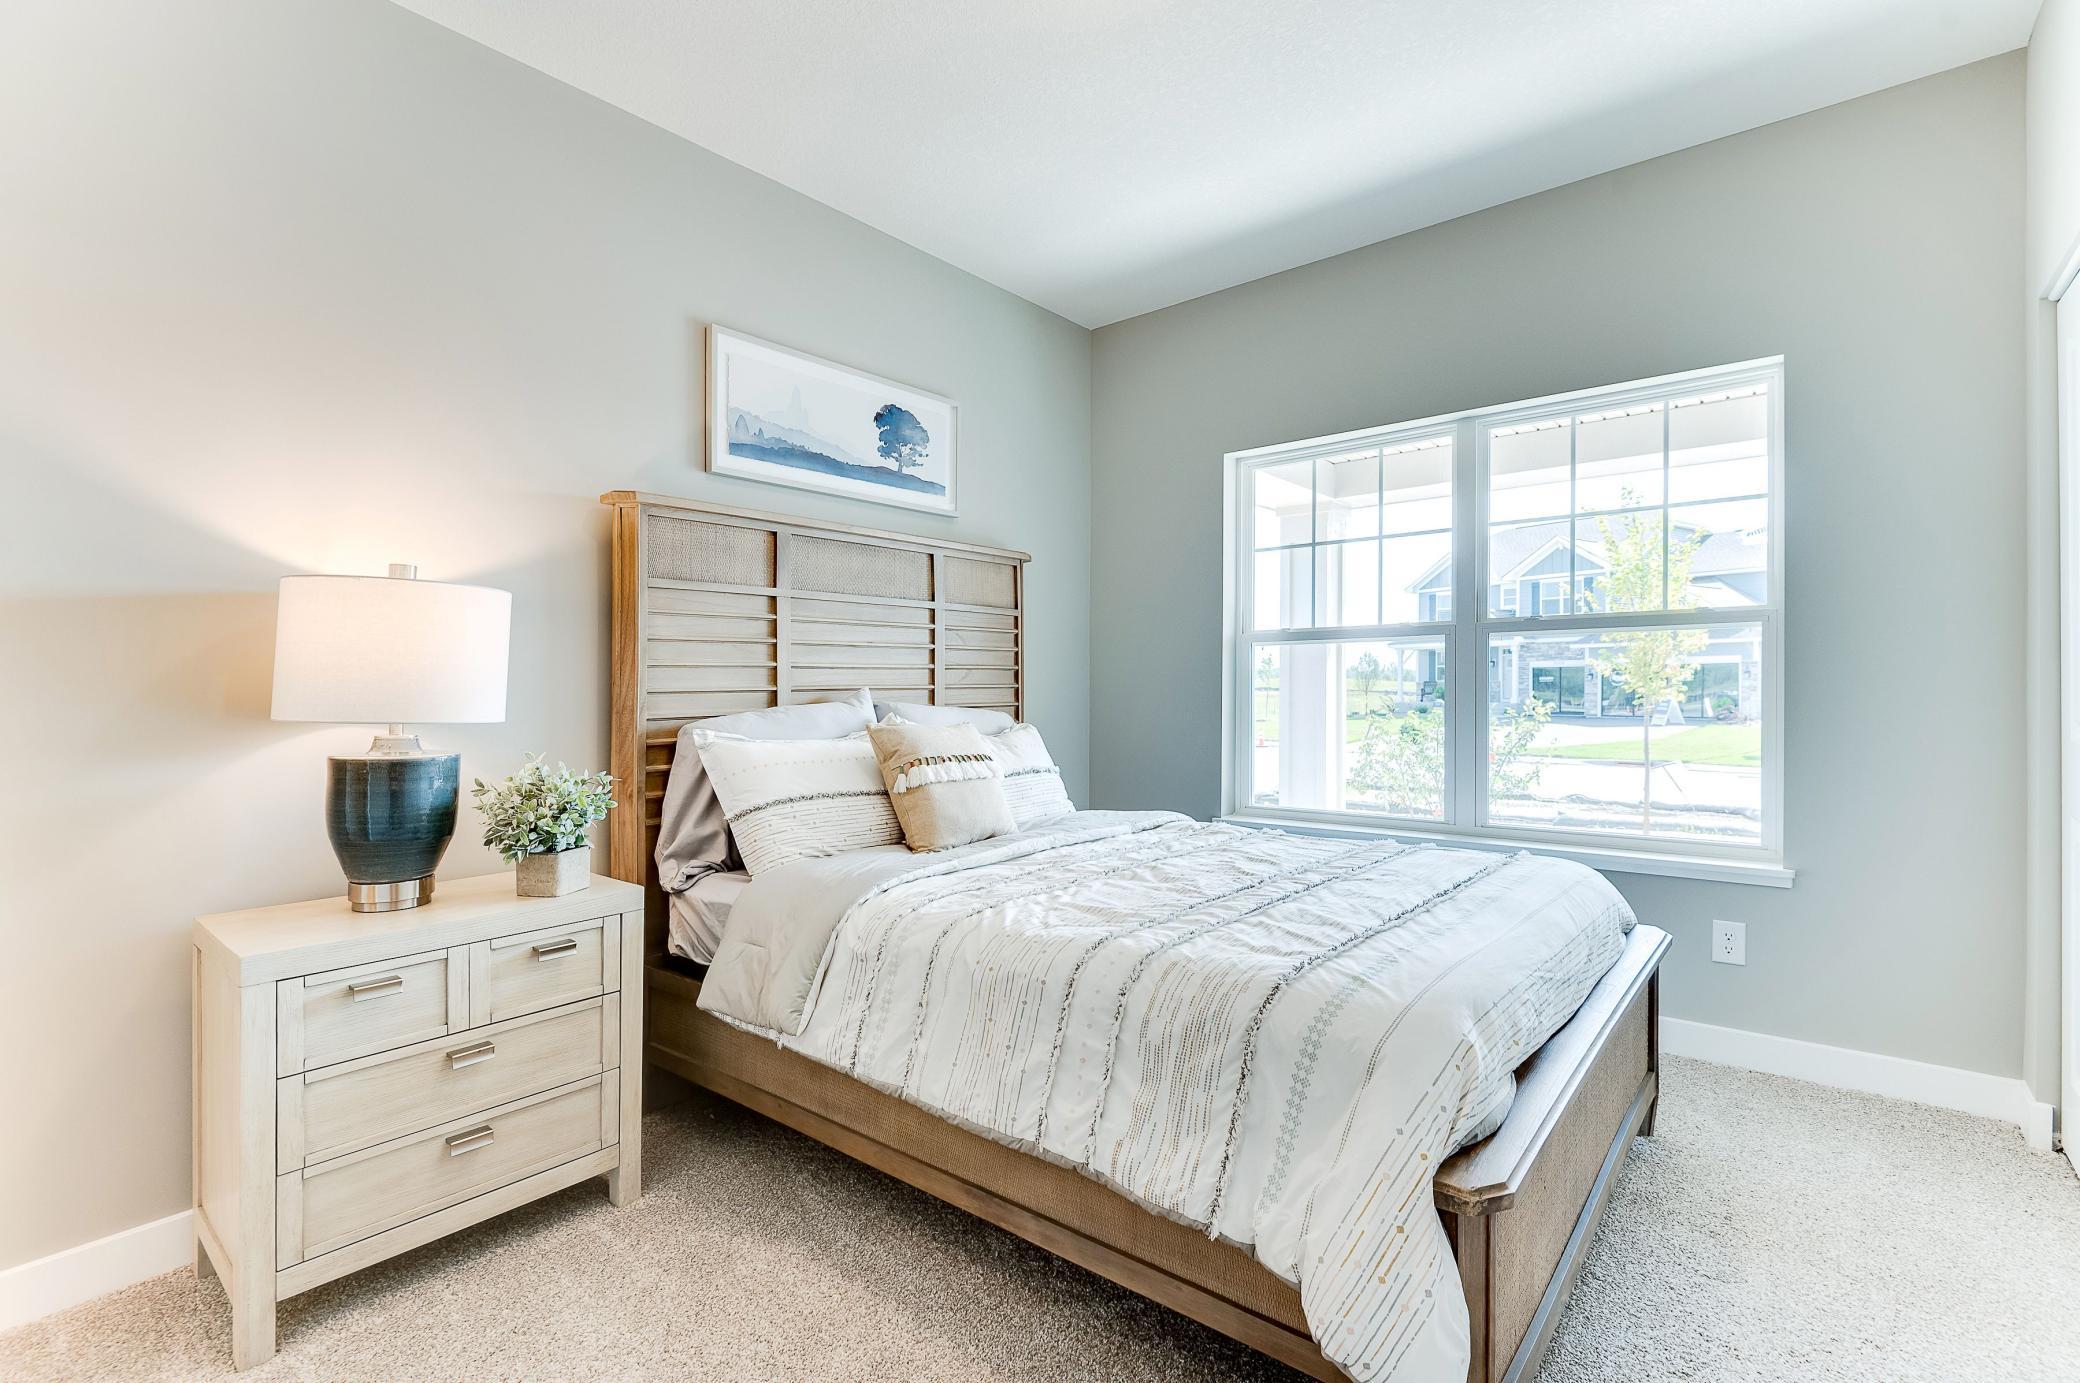 Highly sought after on the main level, this bedroom offers the a room for overnight guest. Complete with a private full bath, it is just a perfect addition to the floor plan! Photo of model home, color and options will vary.